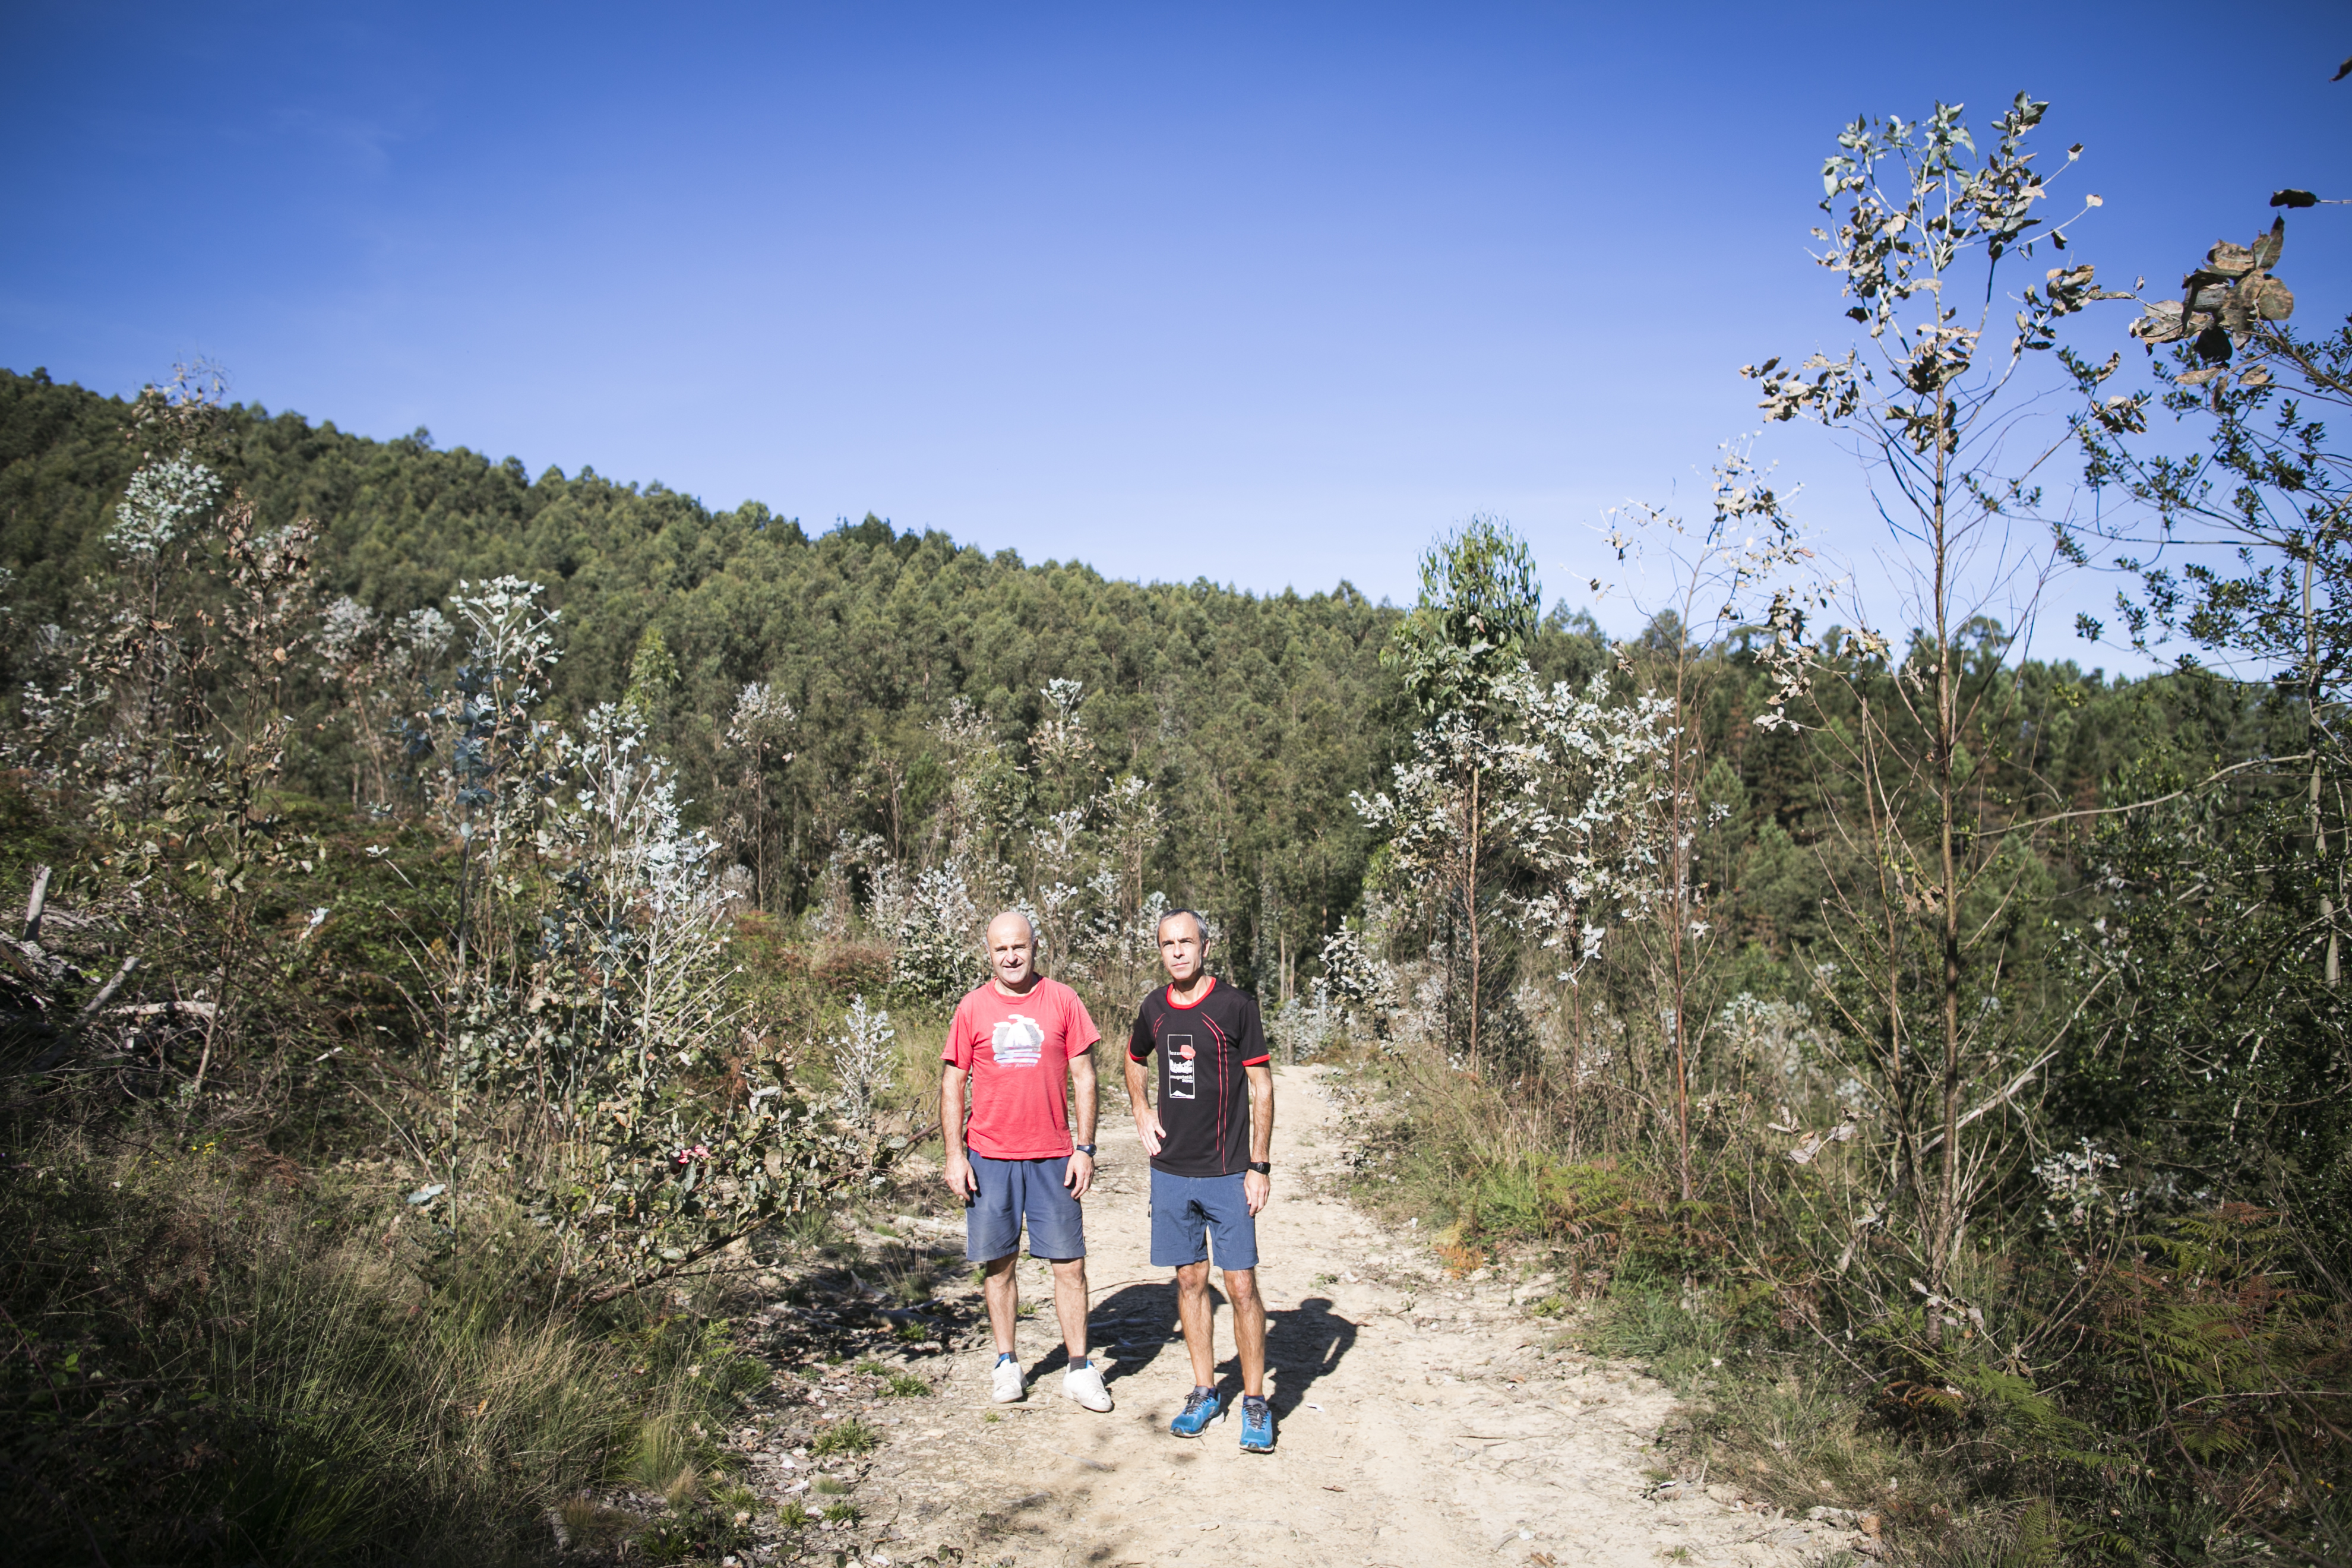 Zarate brothers replaced the pines with Eucalyptus in Zamudio (Bizkaia).